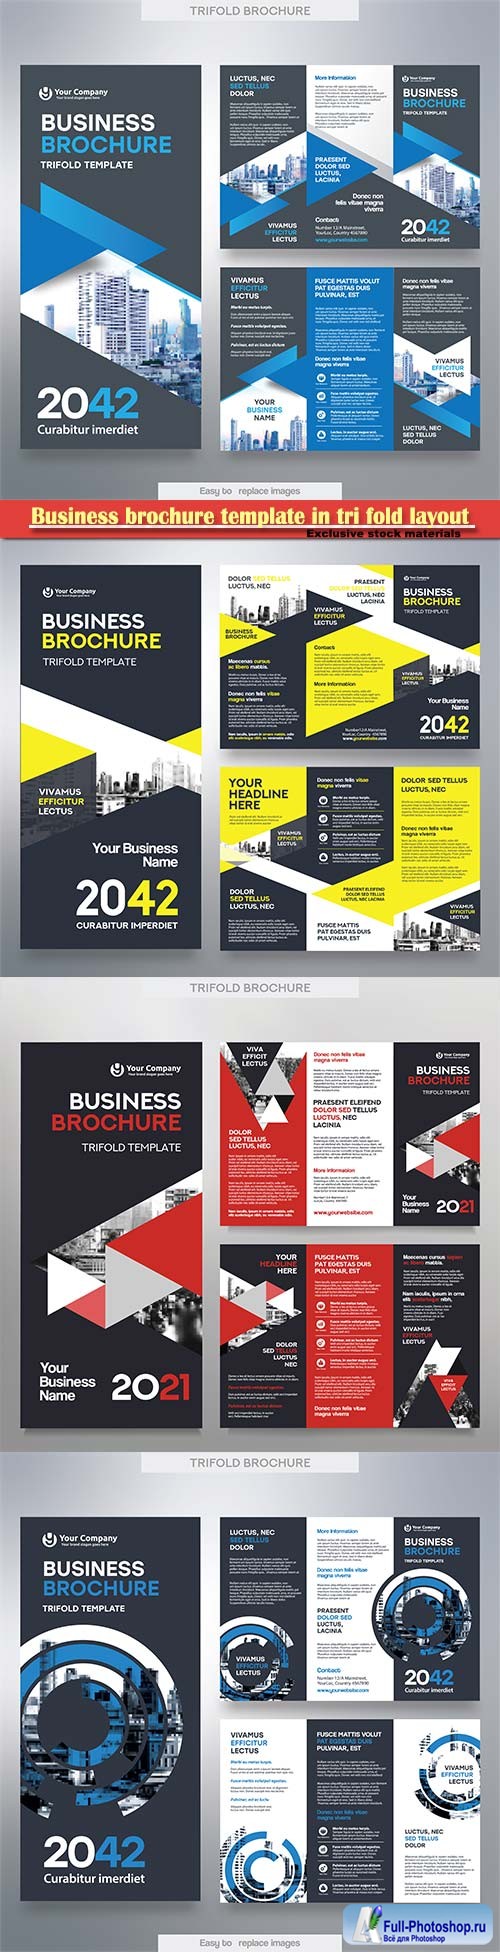 Business brochure template in tri fold layout, corporate design leaflet with replacable image